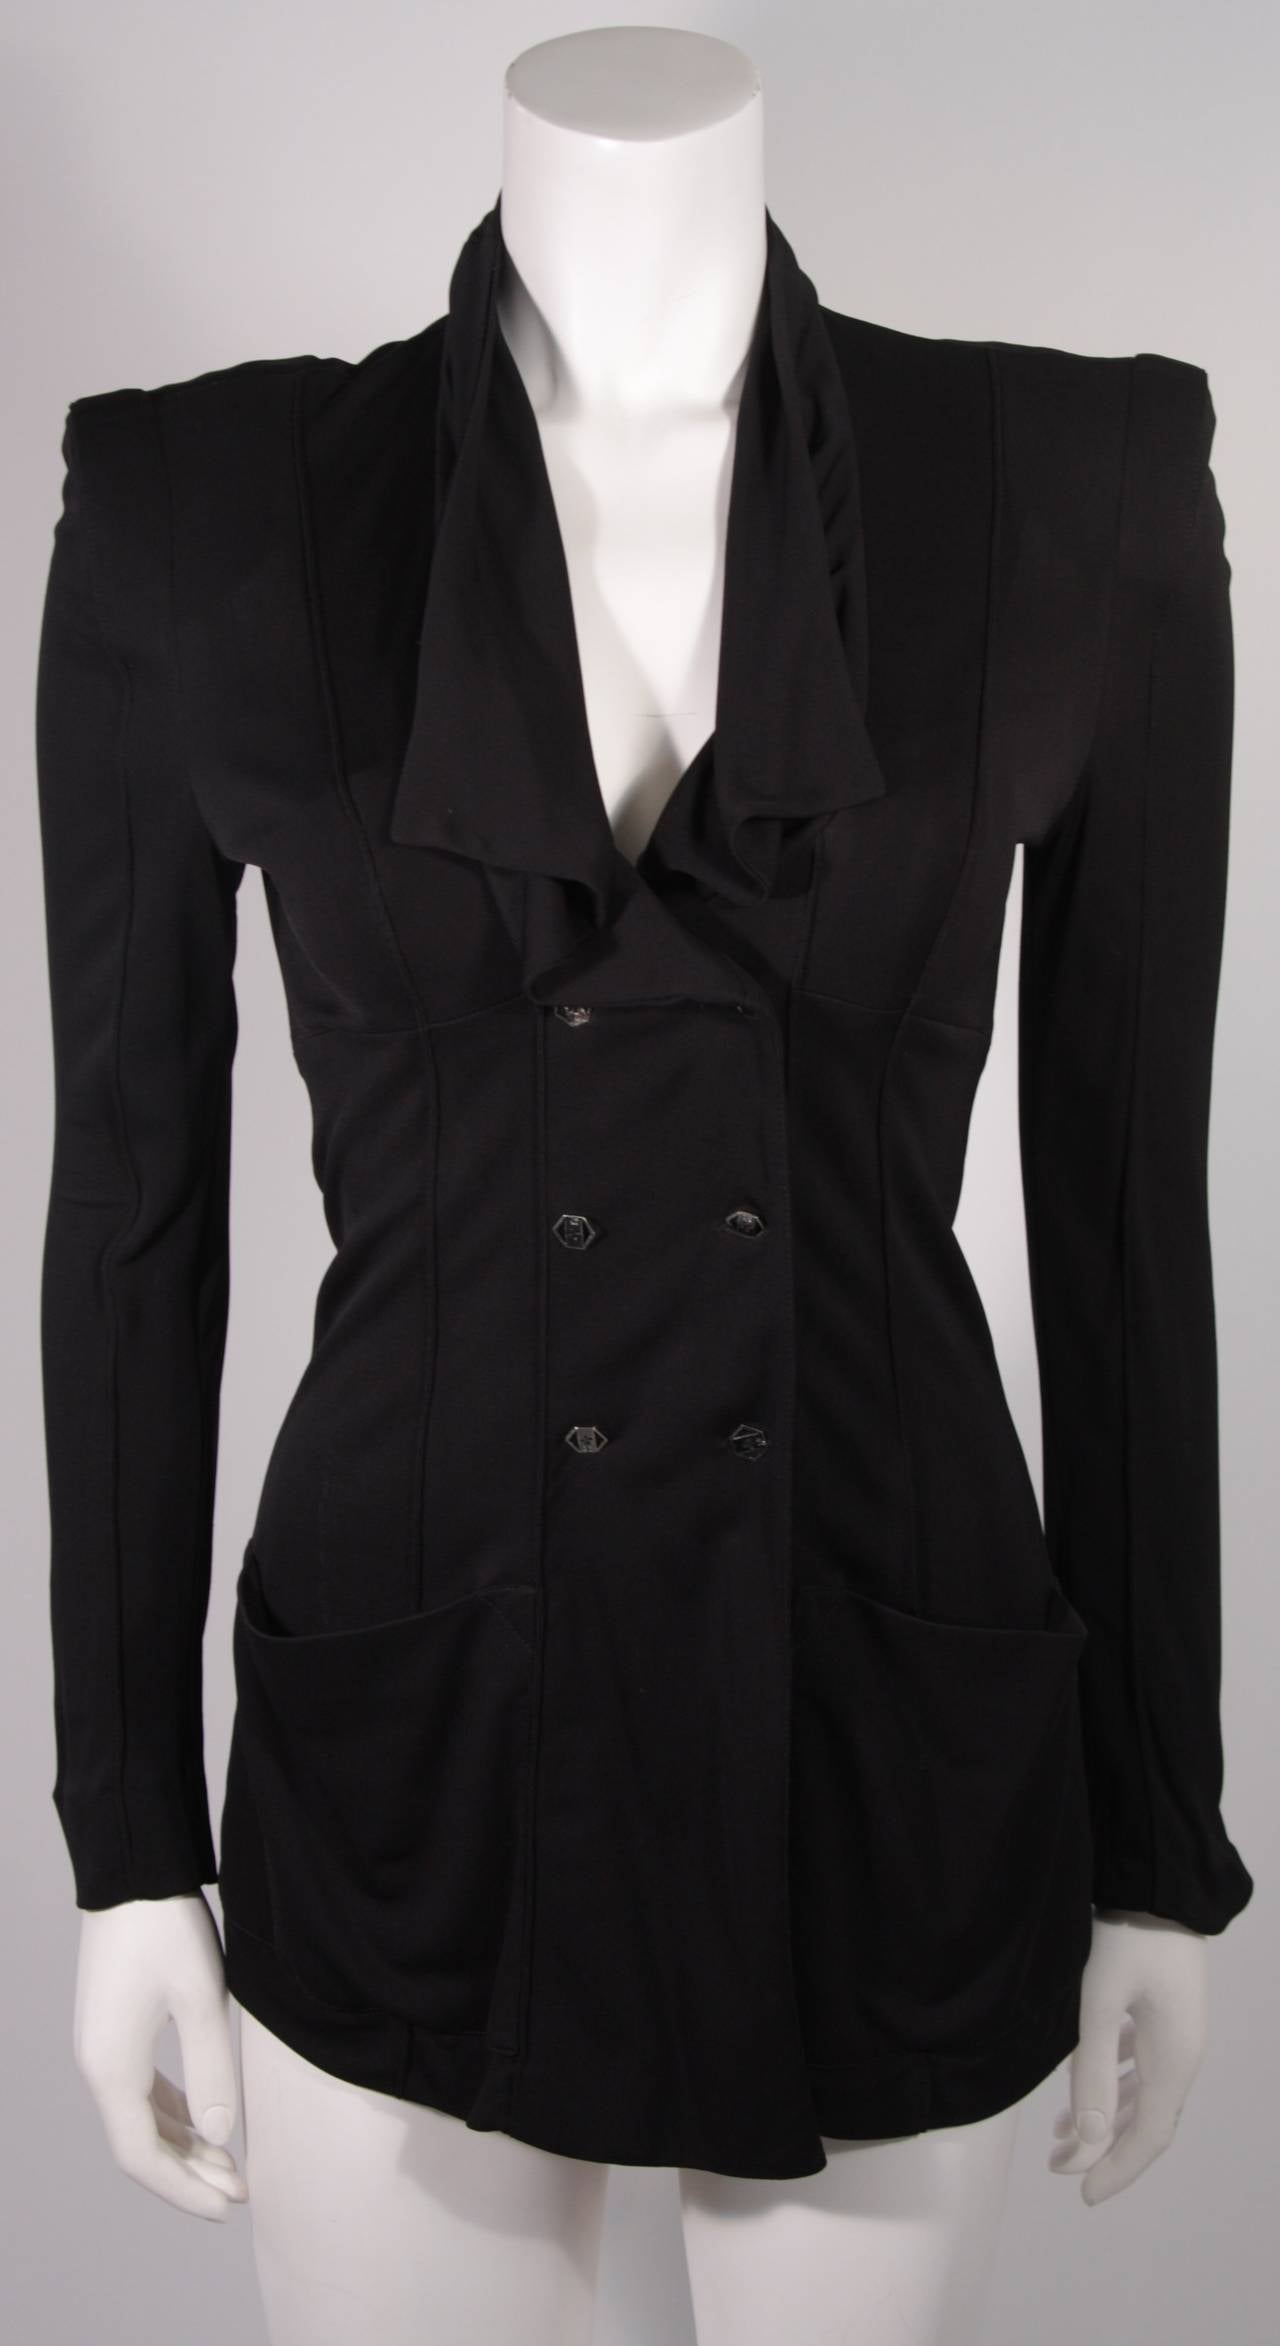 Lagerfield Black Jersey Dress and Jacket Ensemble Size 36 For Sale 1